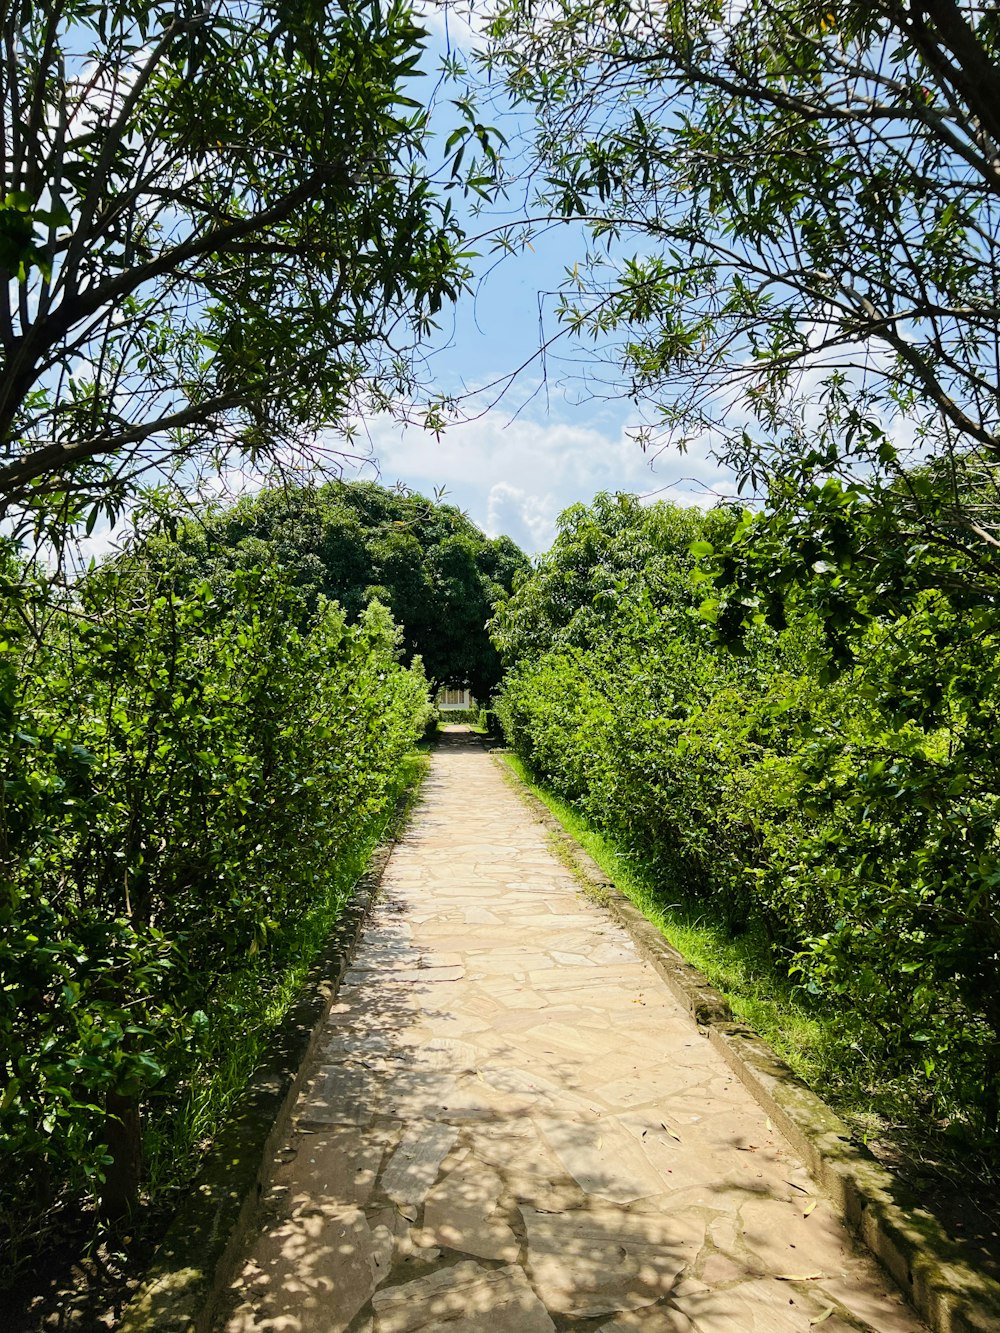 a dirt path surrounded by trees and bushes